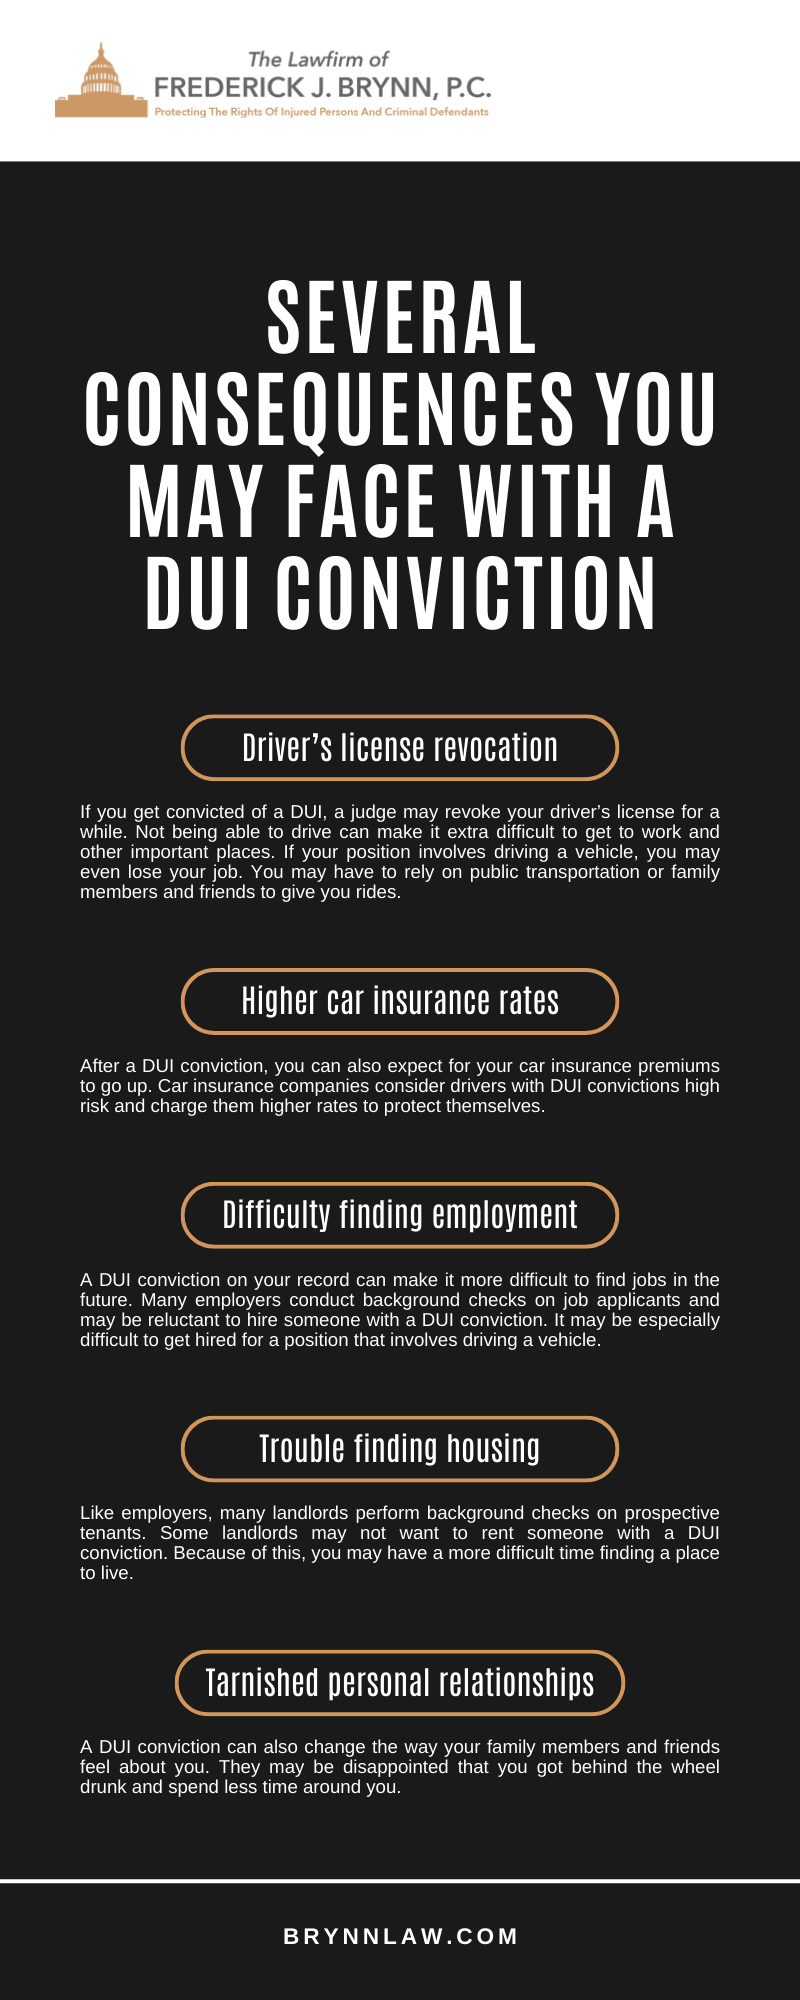 Several Consequences You May Face With A DUI Conviction Infographic